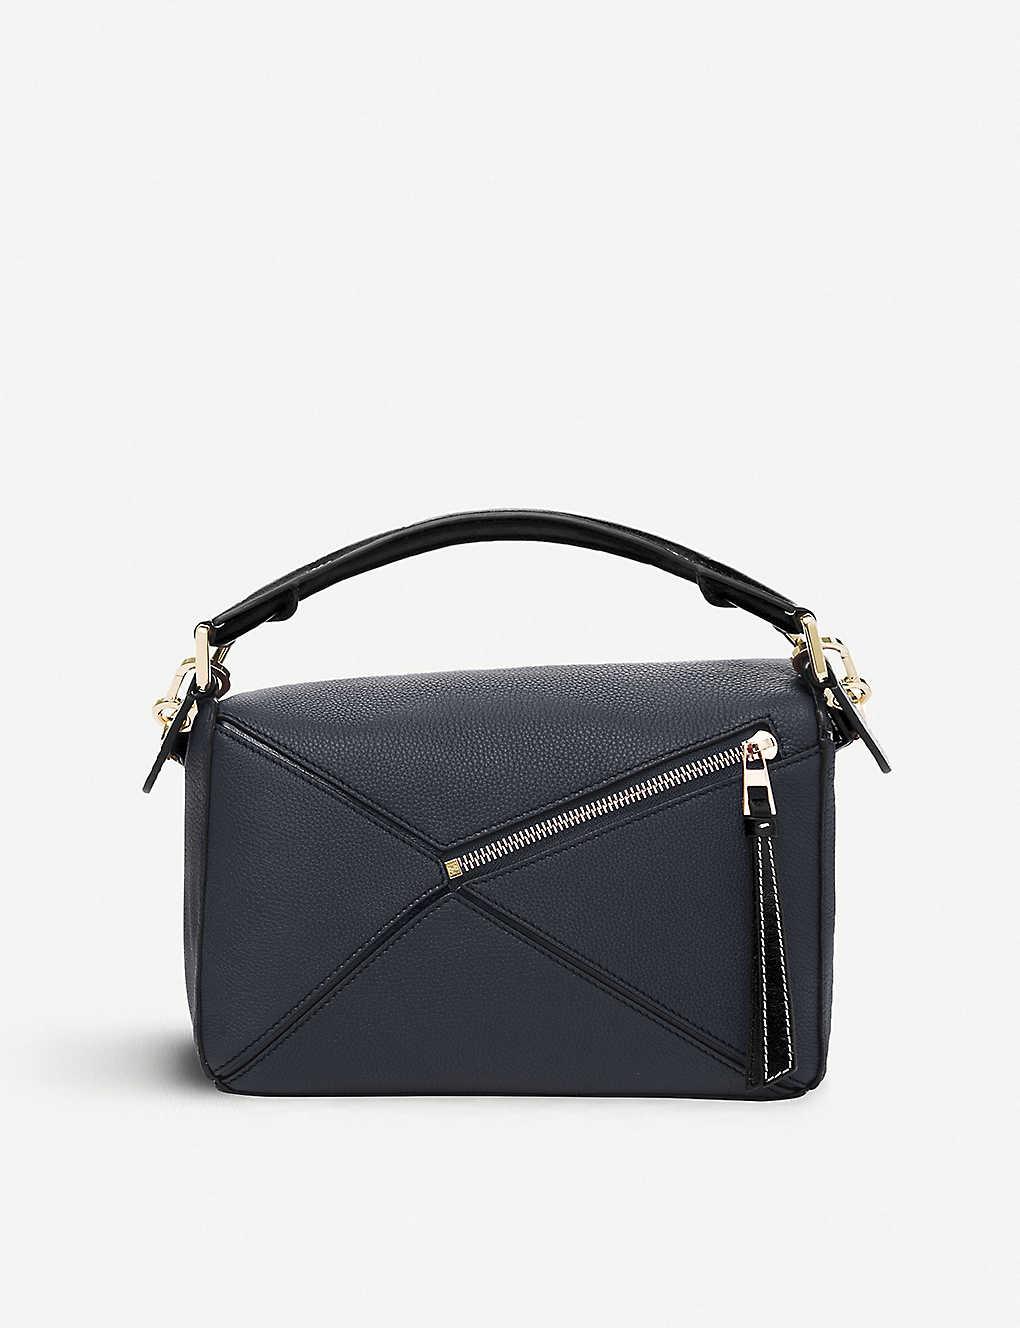 Got my dream Loewe small puzzle bag in midnight navy/black, pre